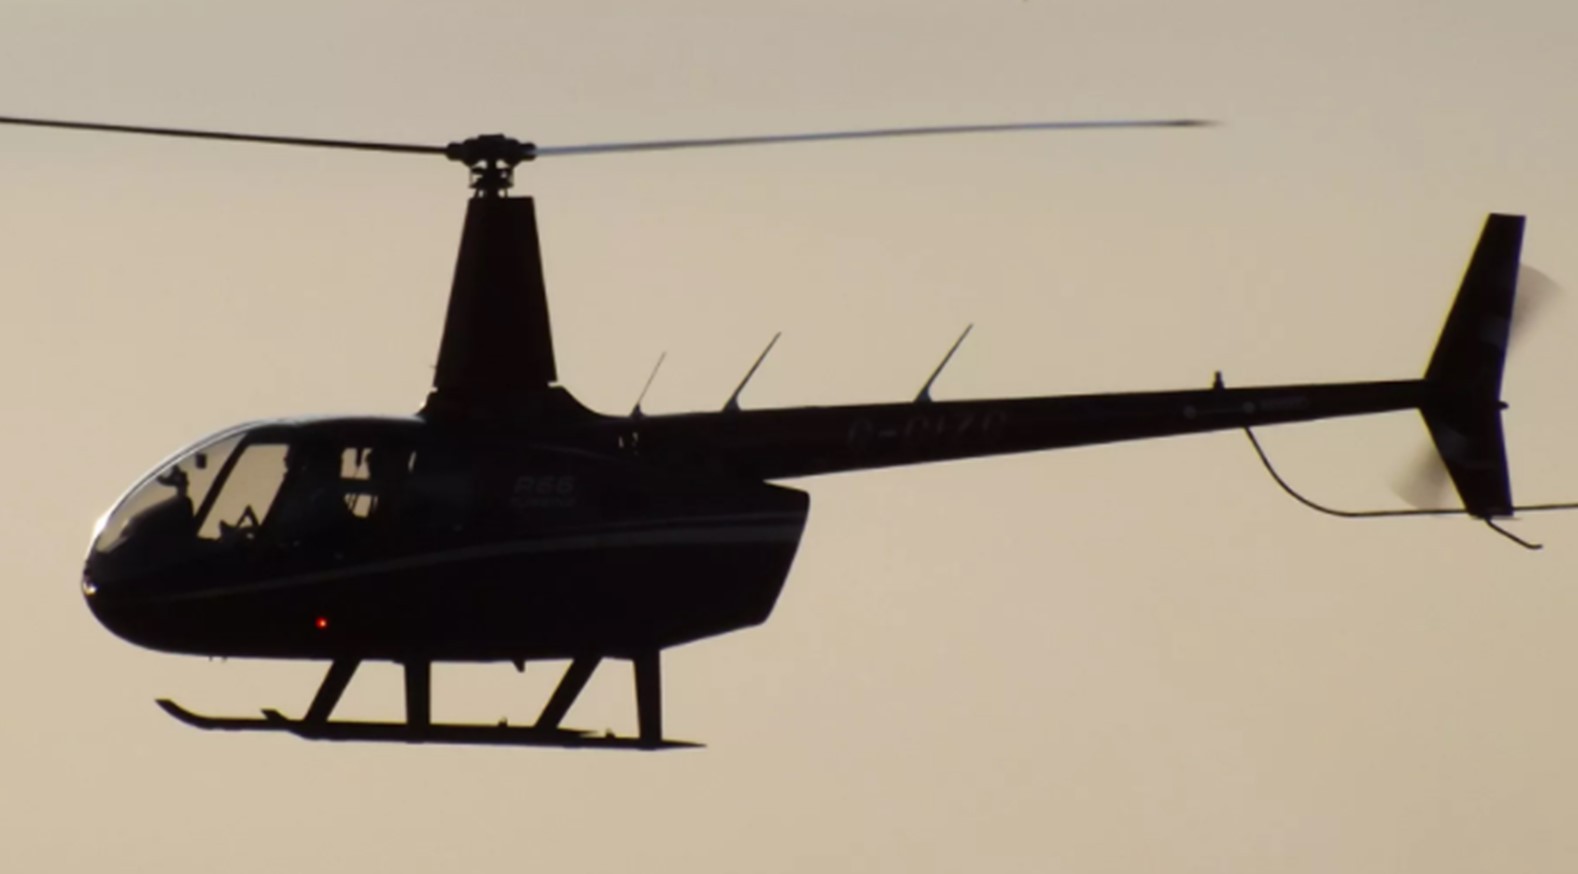 Four People Died in a Helicopter Crash in California